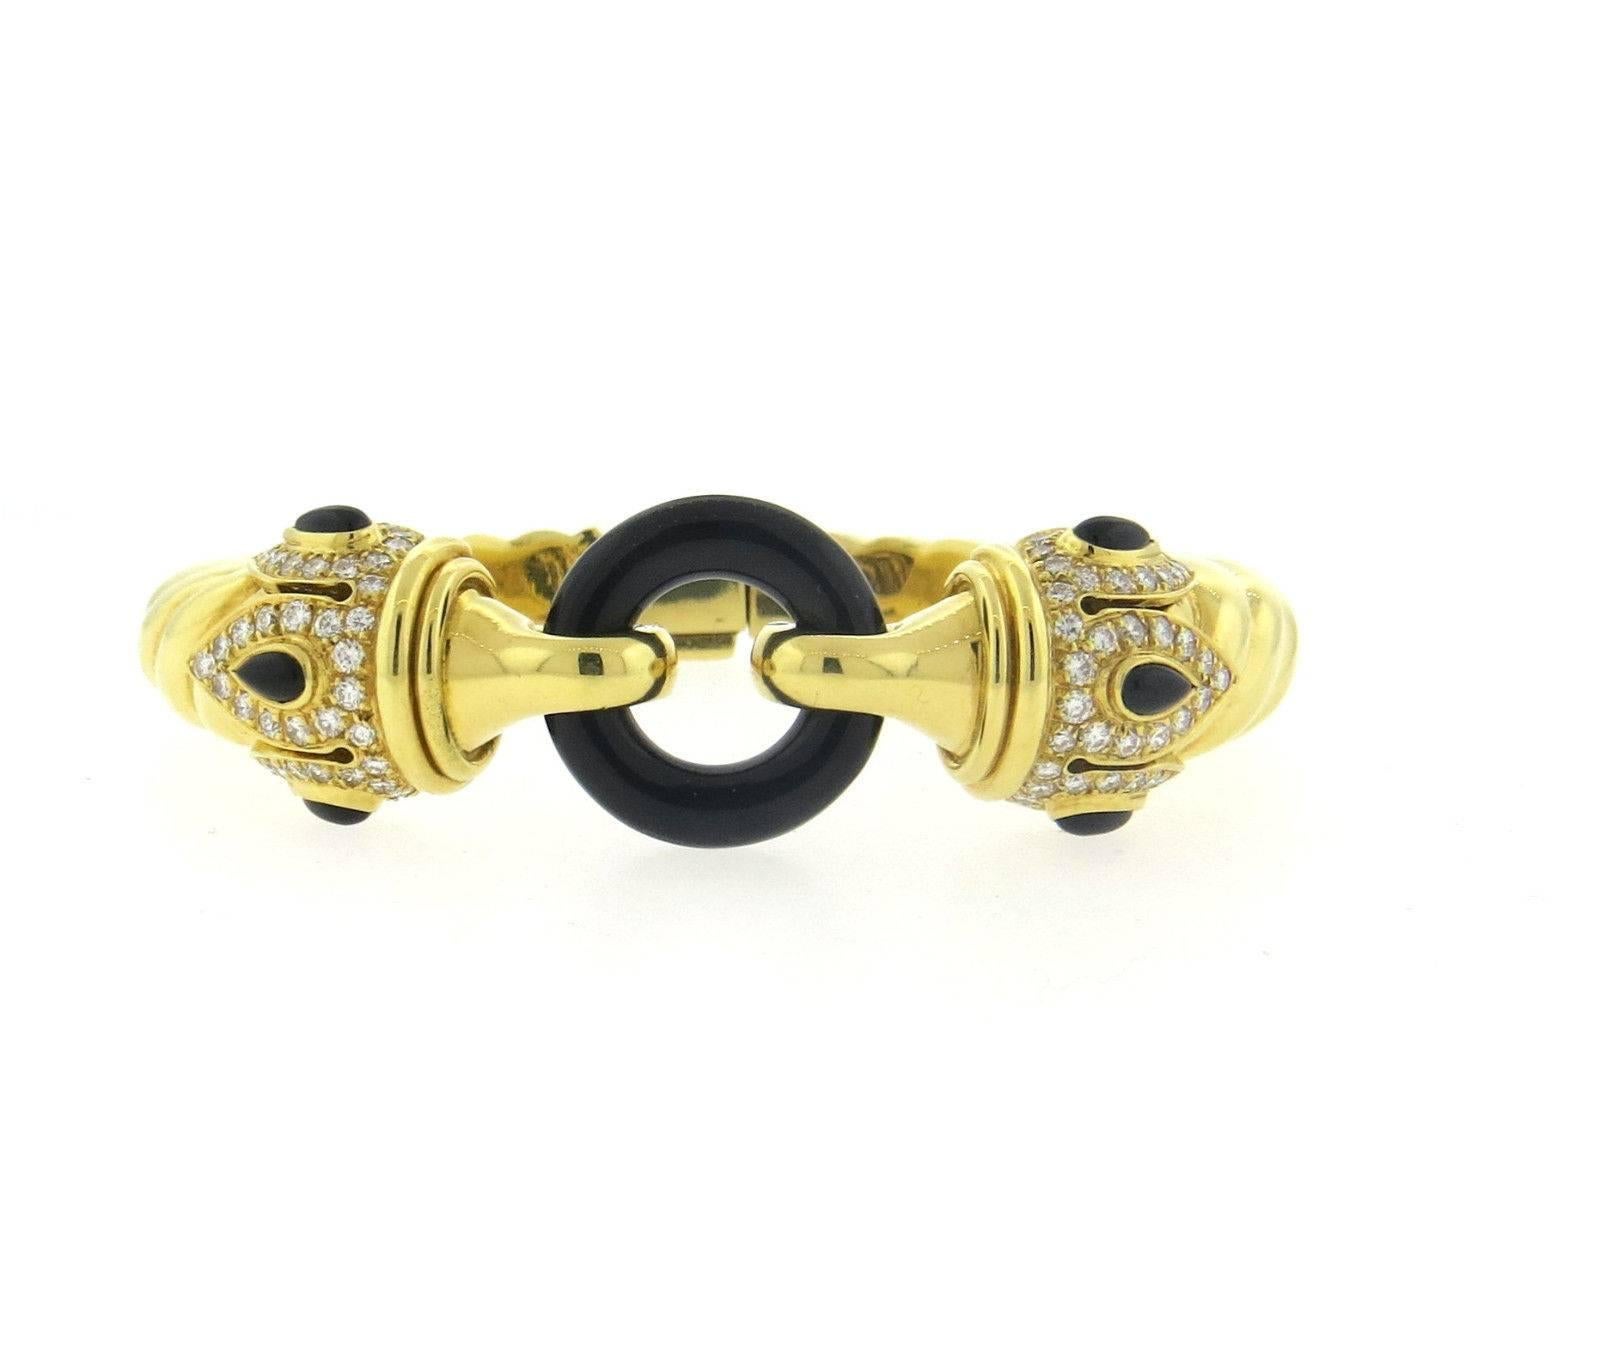 An 18k yellow gold bracelet set with approximately 1 carat of GH/VS diamonds and onyx.  Crafted in Italy, the bracelet will fit up to 7